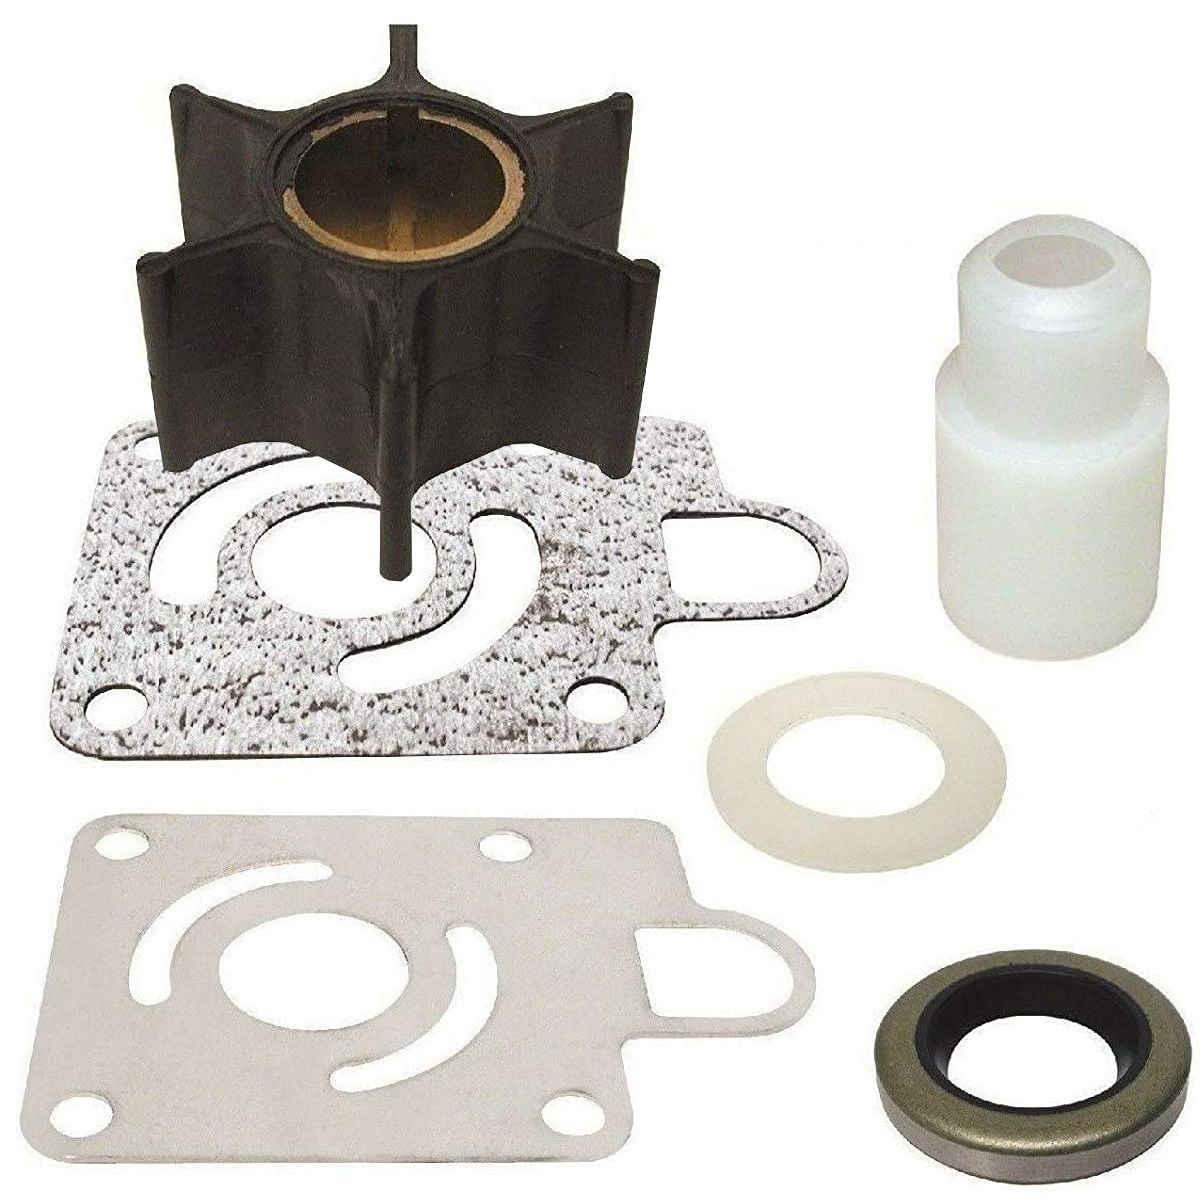 Water Pump Impeller Kit for Chrysler Force 75 85 90 100 105 115 125 140 hp Replaces FK1069 